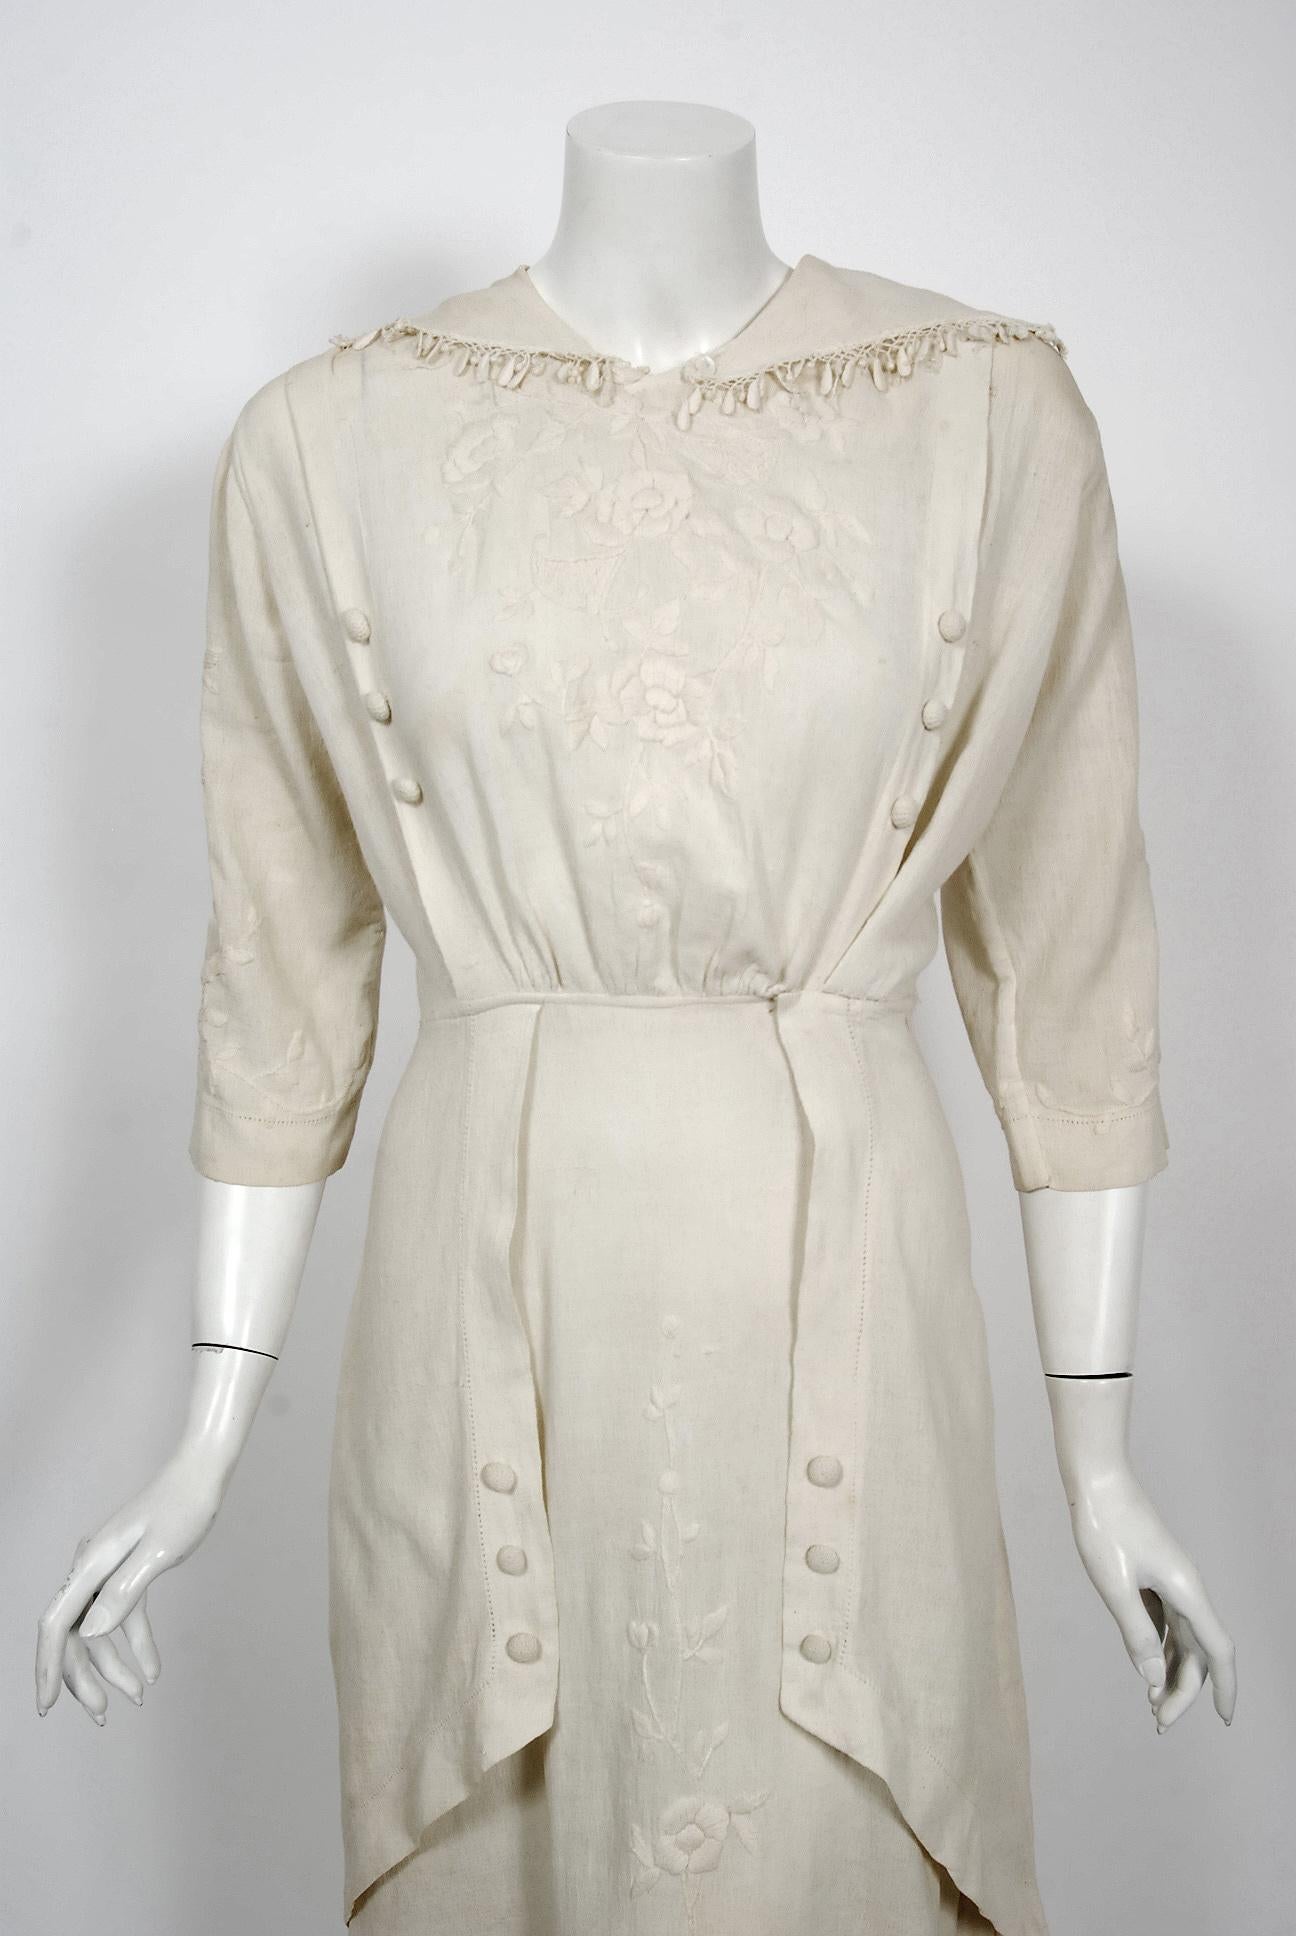 This ethereal Edwardian couture ivory silk-crepe tea gown, with an abundance of embroidery, is of the highest quality. The garment was discovered with provenance; tagged 'Bessie Andrews white crepe dress 1916'. The stylized charm of the embroidered